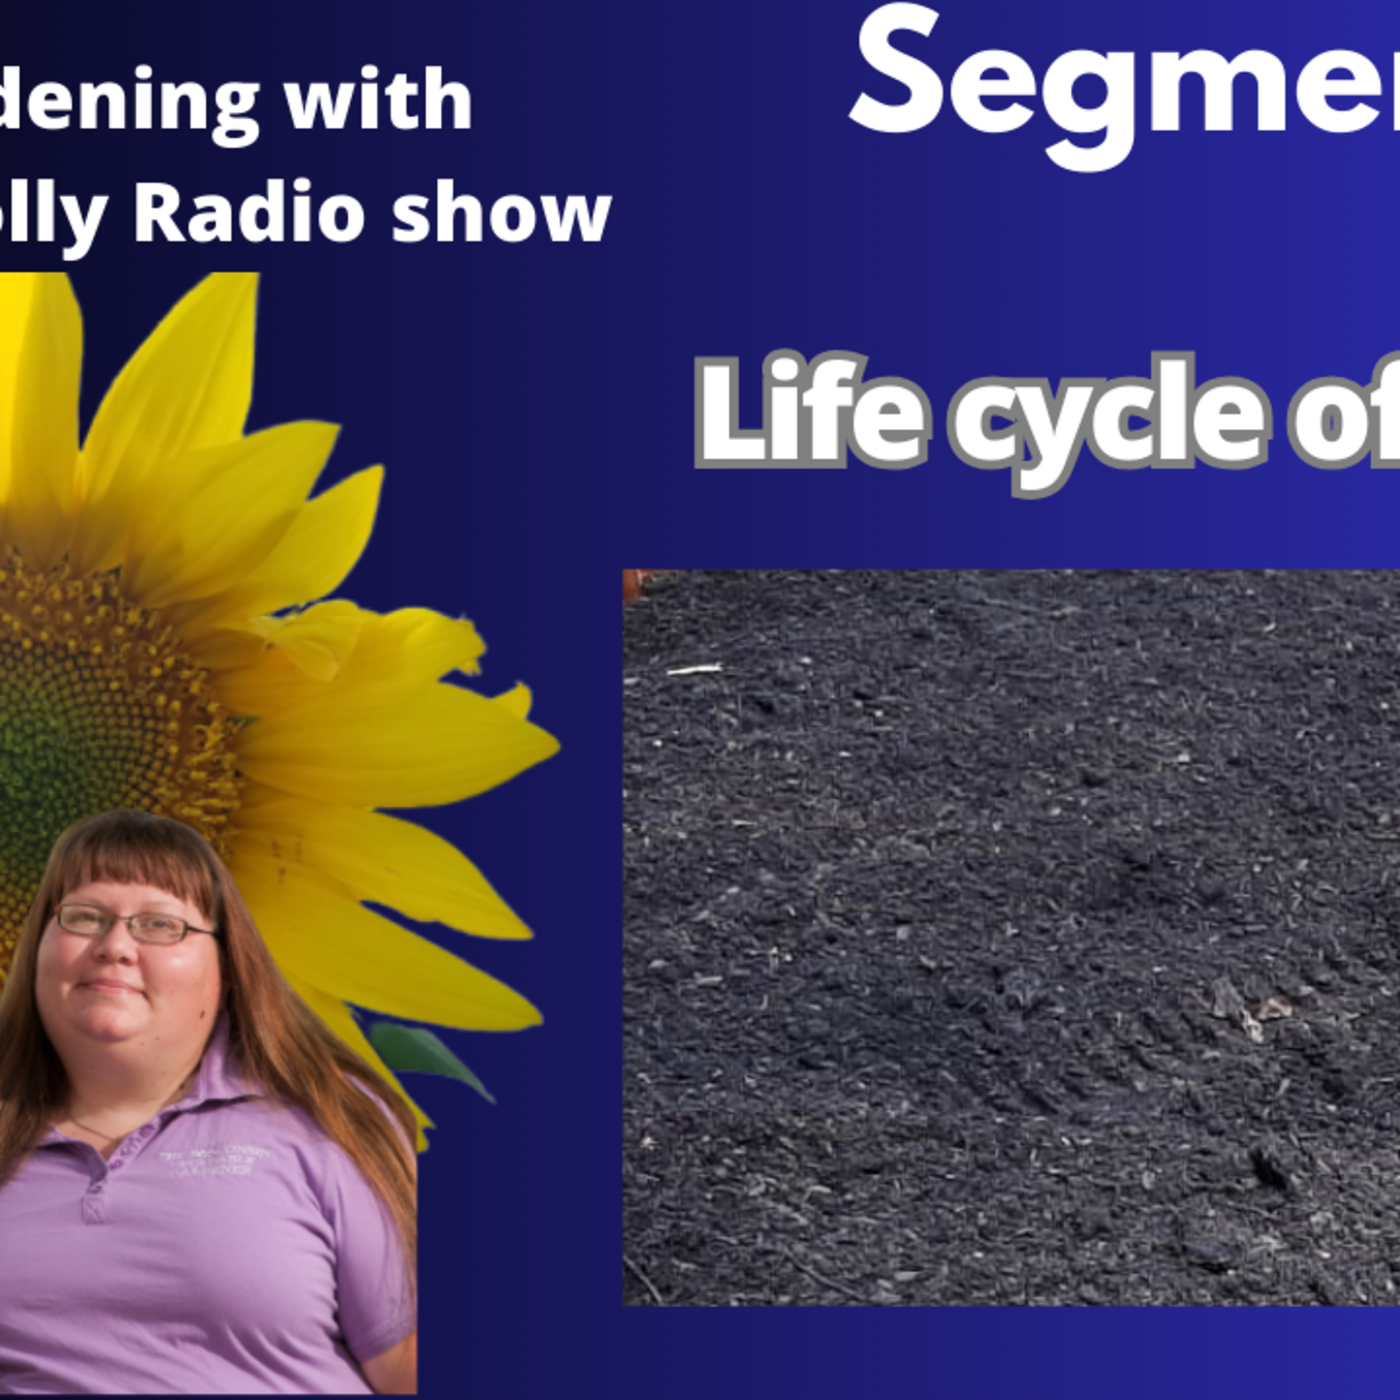 Episode 1177: Seg 2 of S8E5 The life of soil -The Gardening with Joey and Holly Radio Show